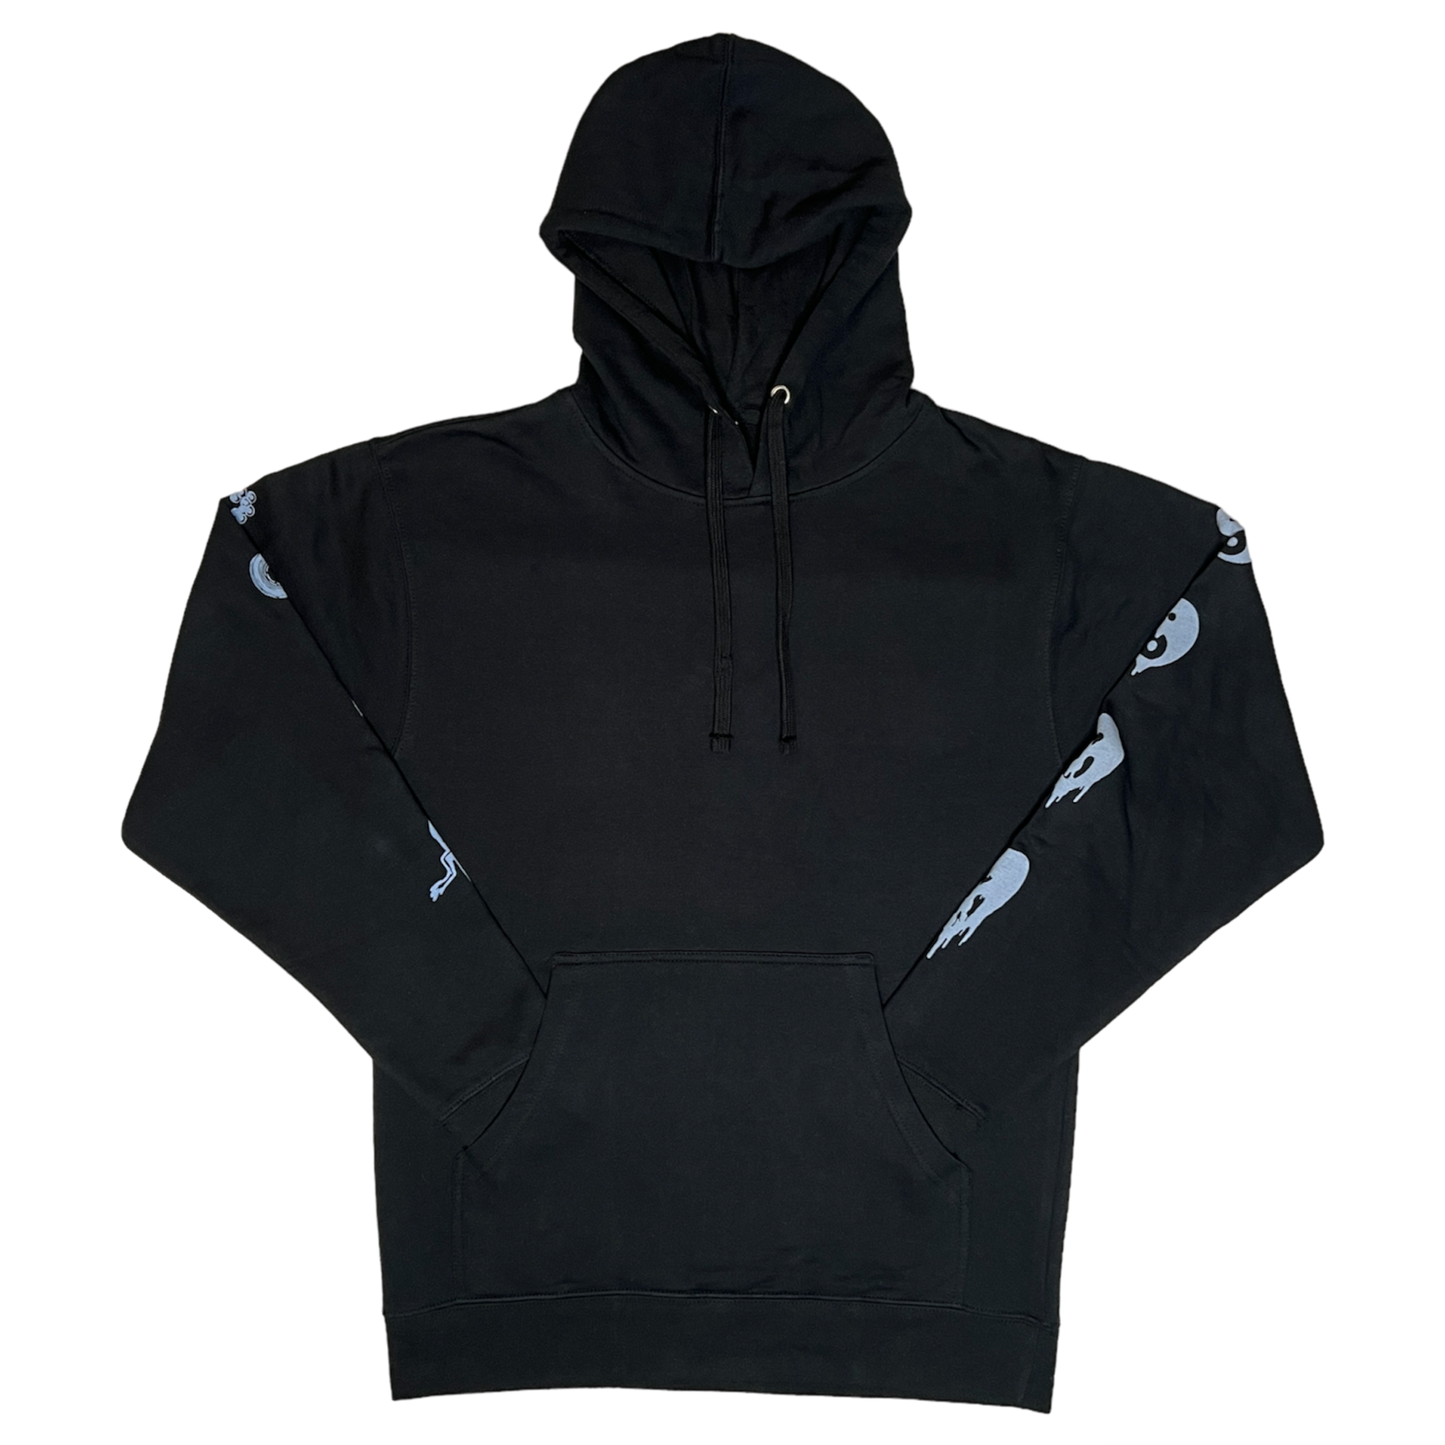 "Protect The Toad" - Blue Sky on Black Hoodie